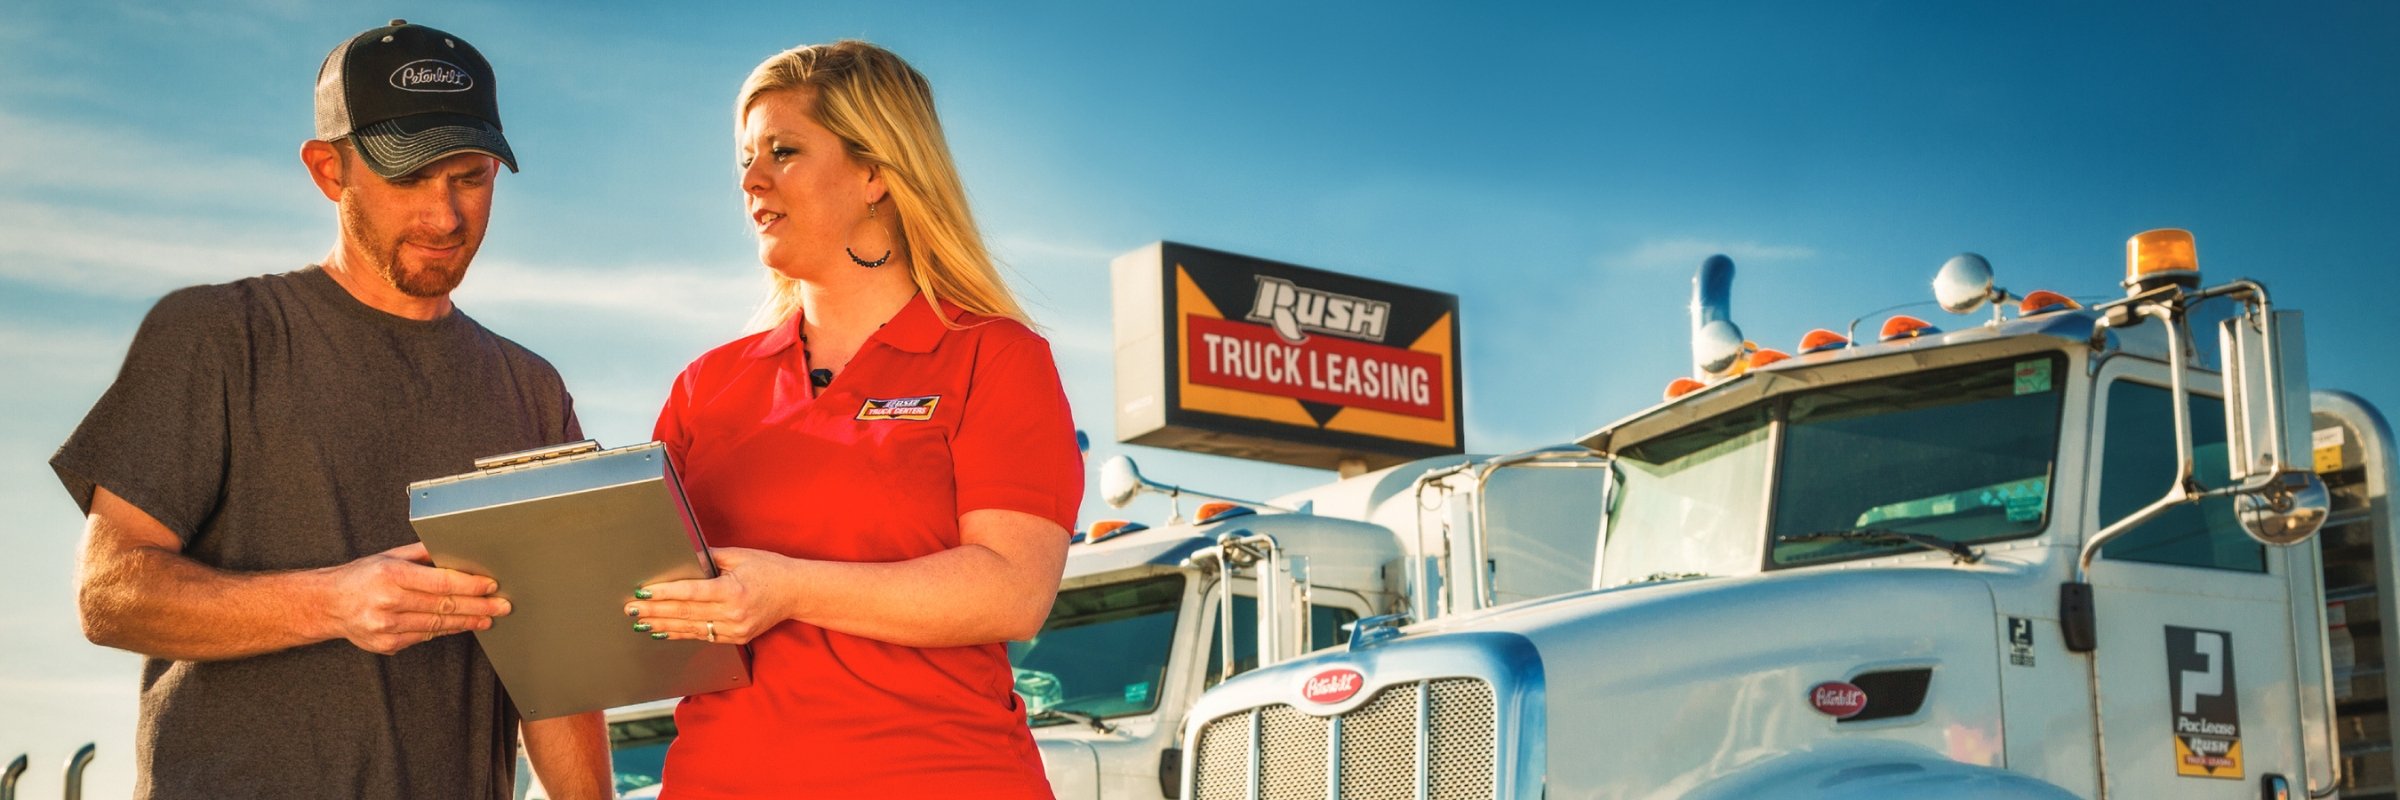 Rush Truck Leasing employee talking with customer on truck lot